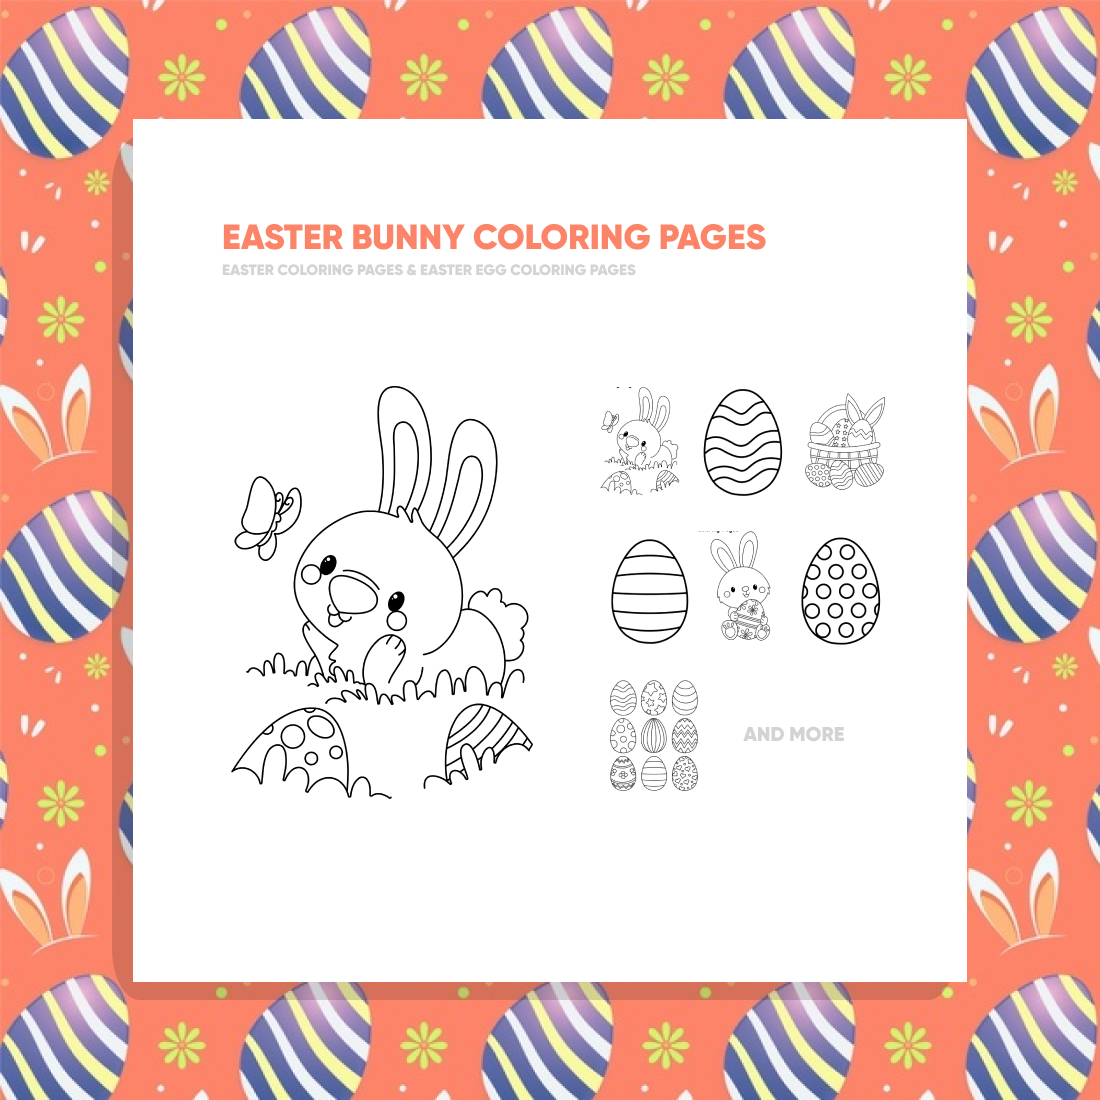 Easter Bunny Coloring Pages cover image.